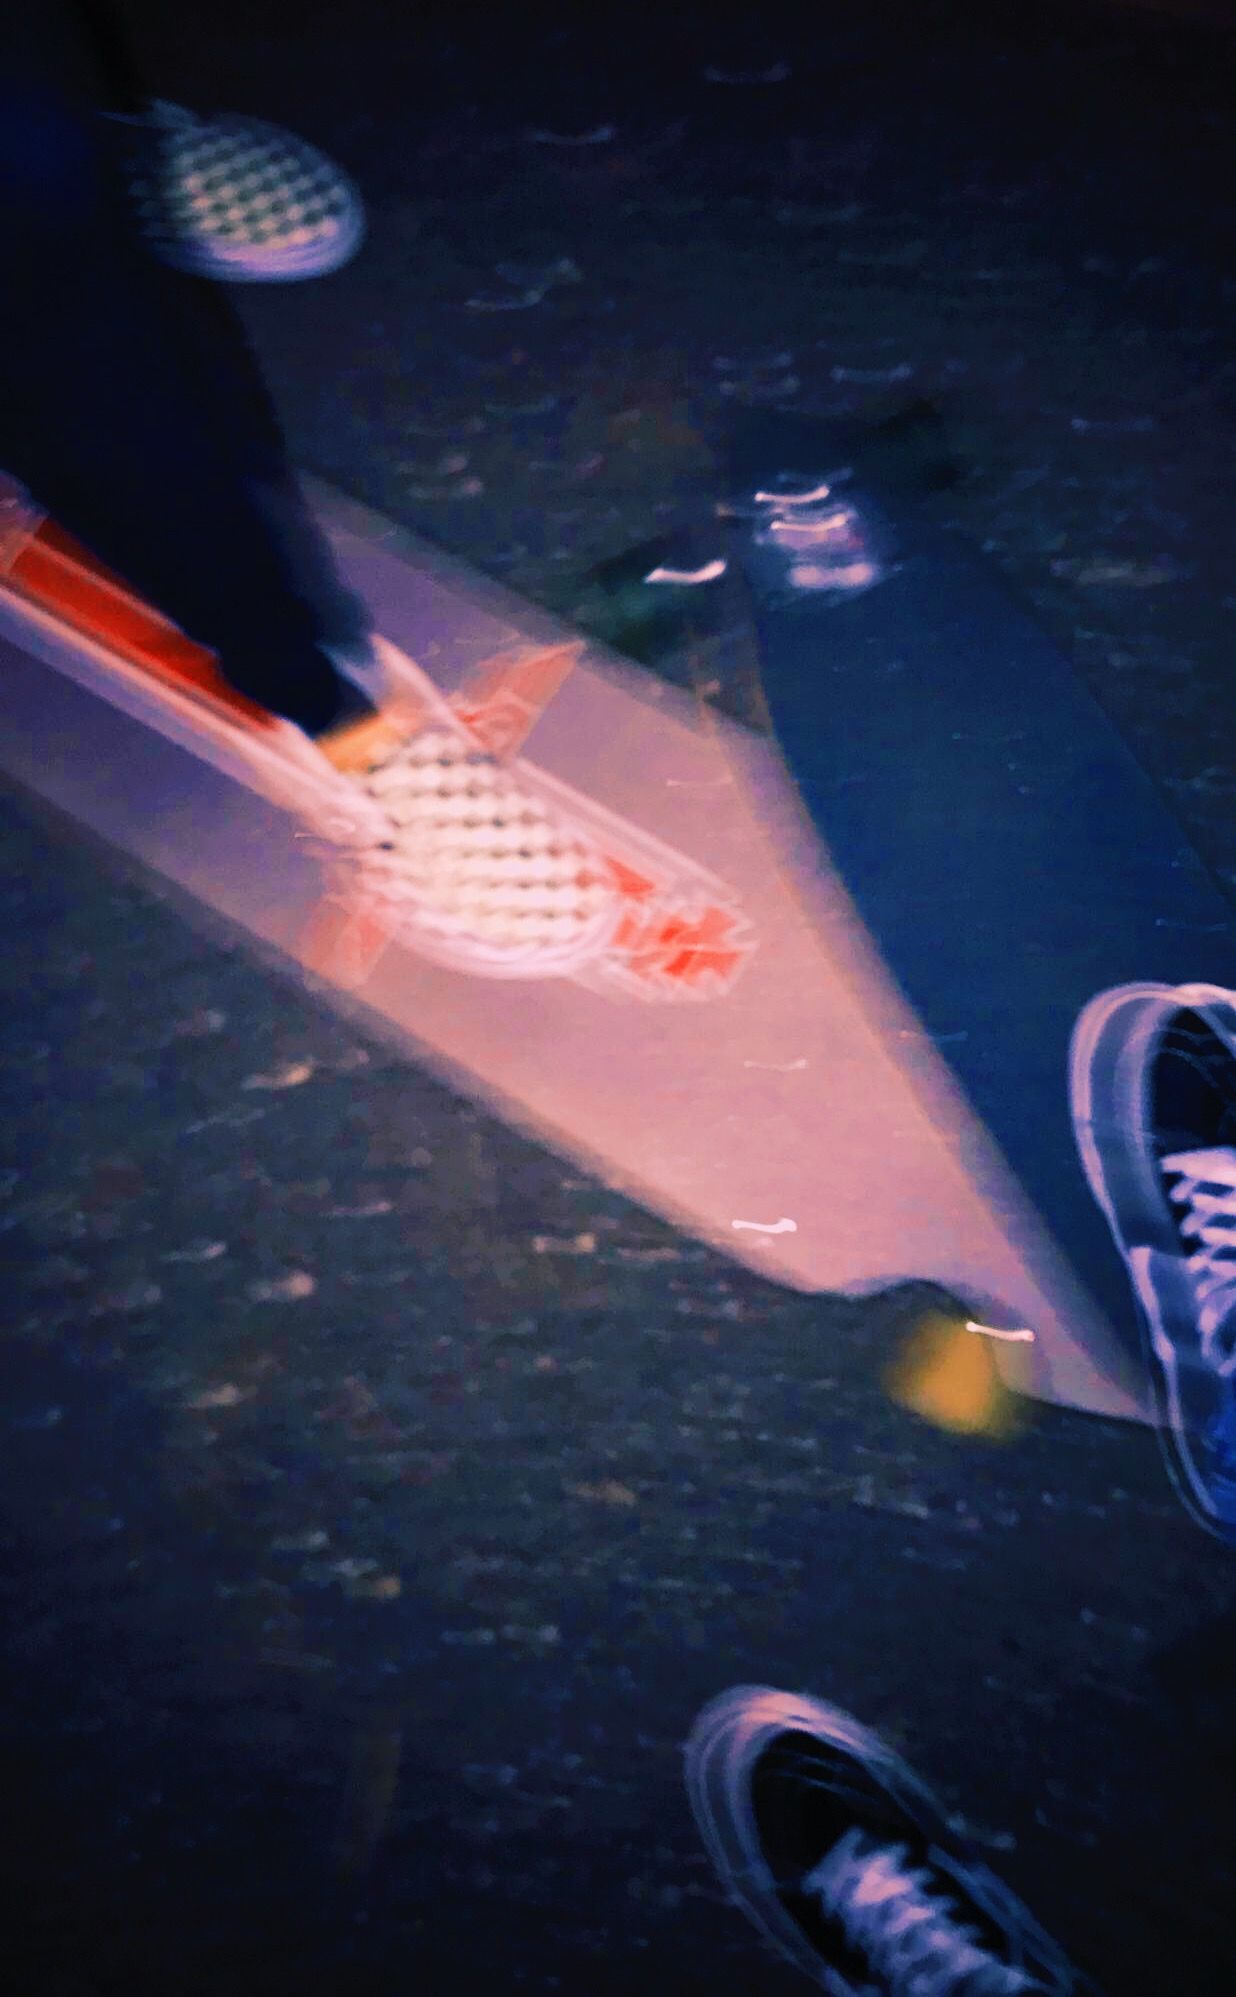 A skateboard and a person's feet wearing sneakers are reflected in a puddle. - Skate, skater